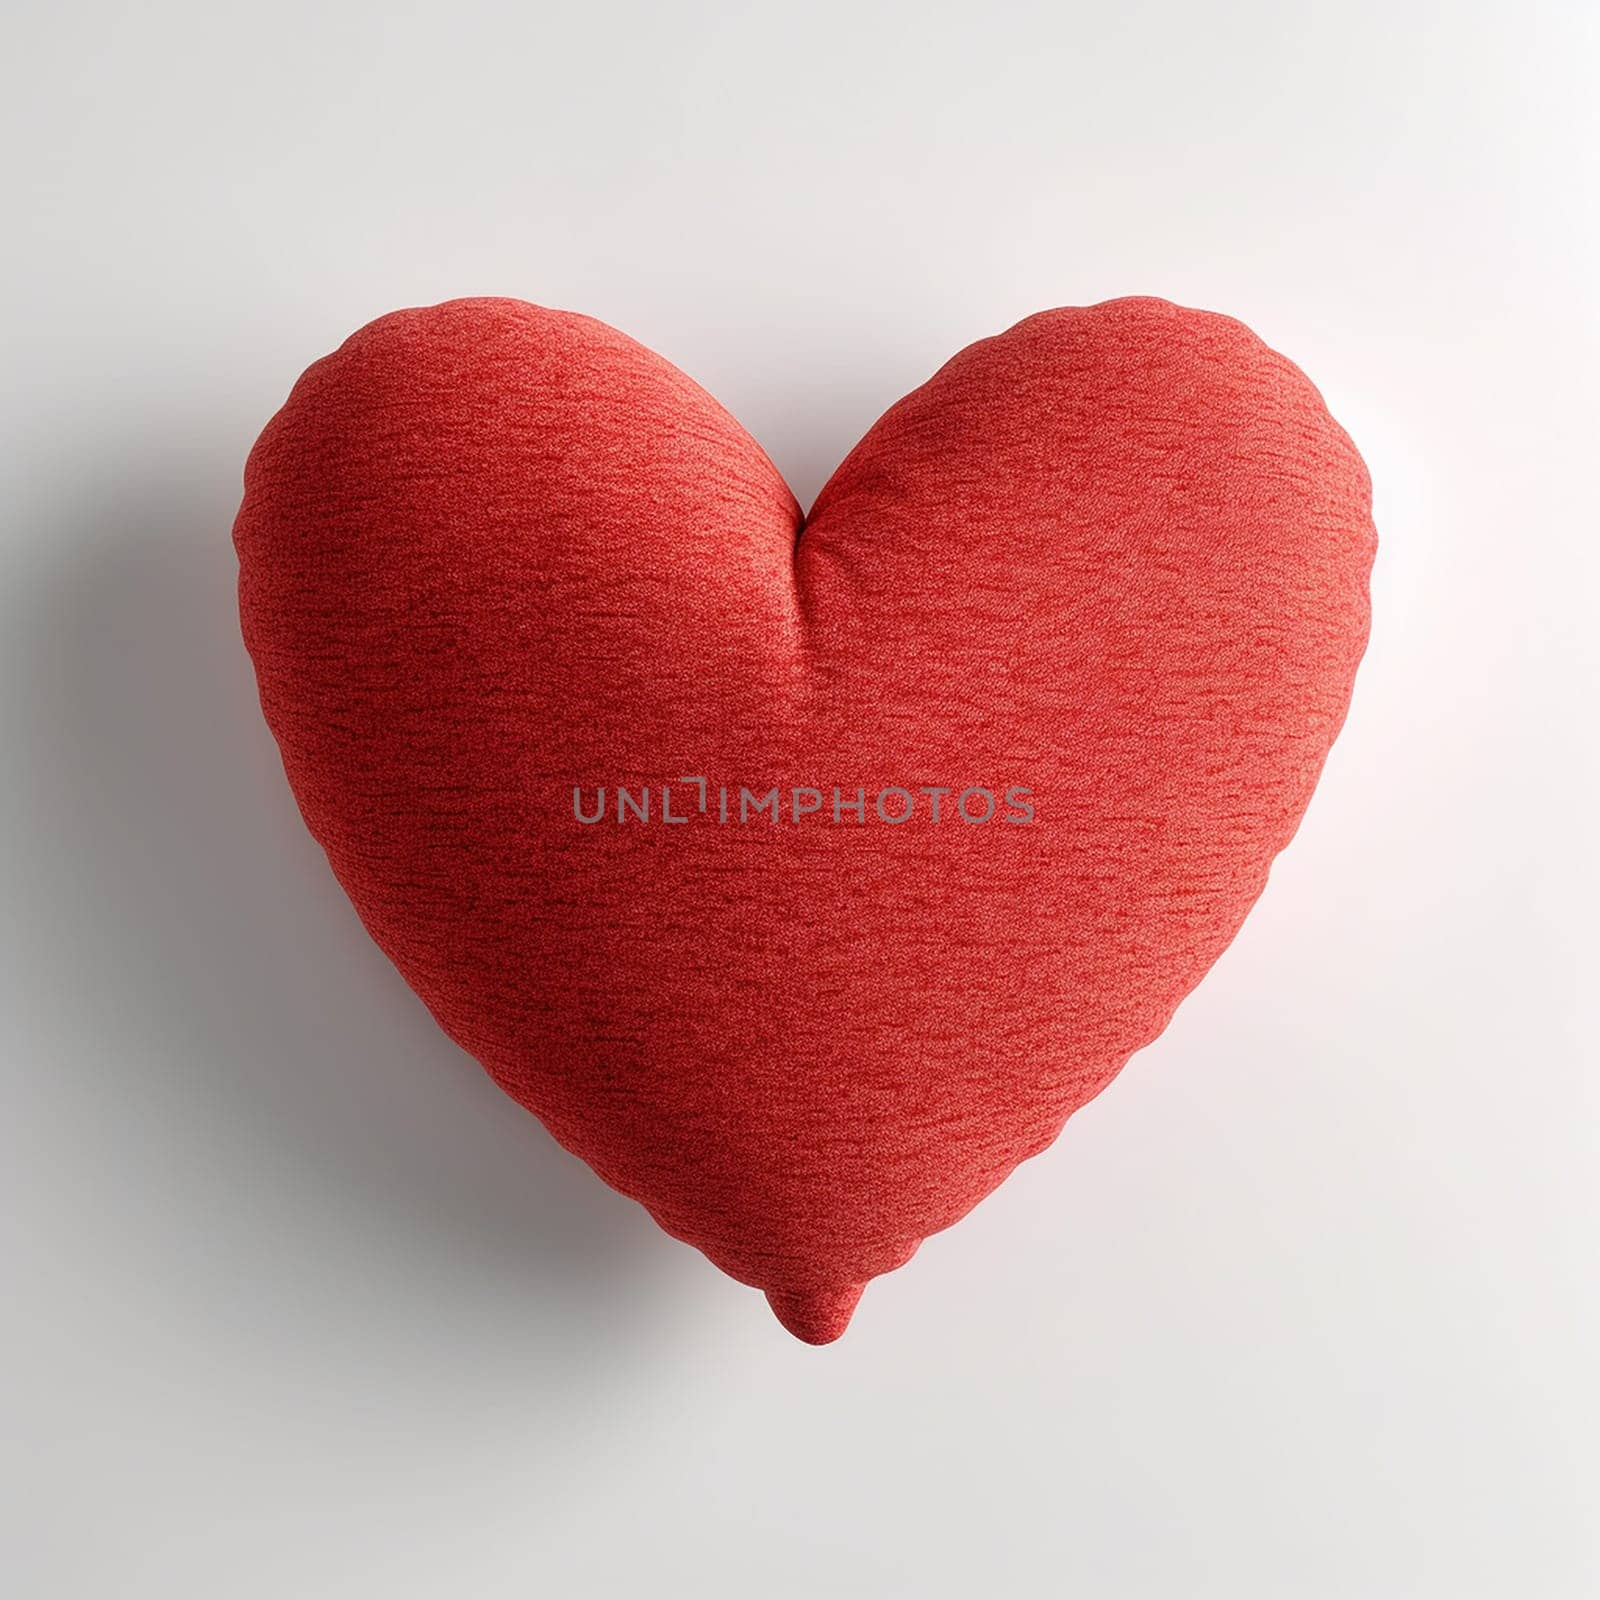 Red fabric heart-shaped pillow on white background.